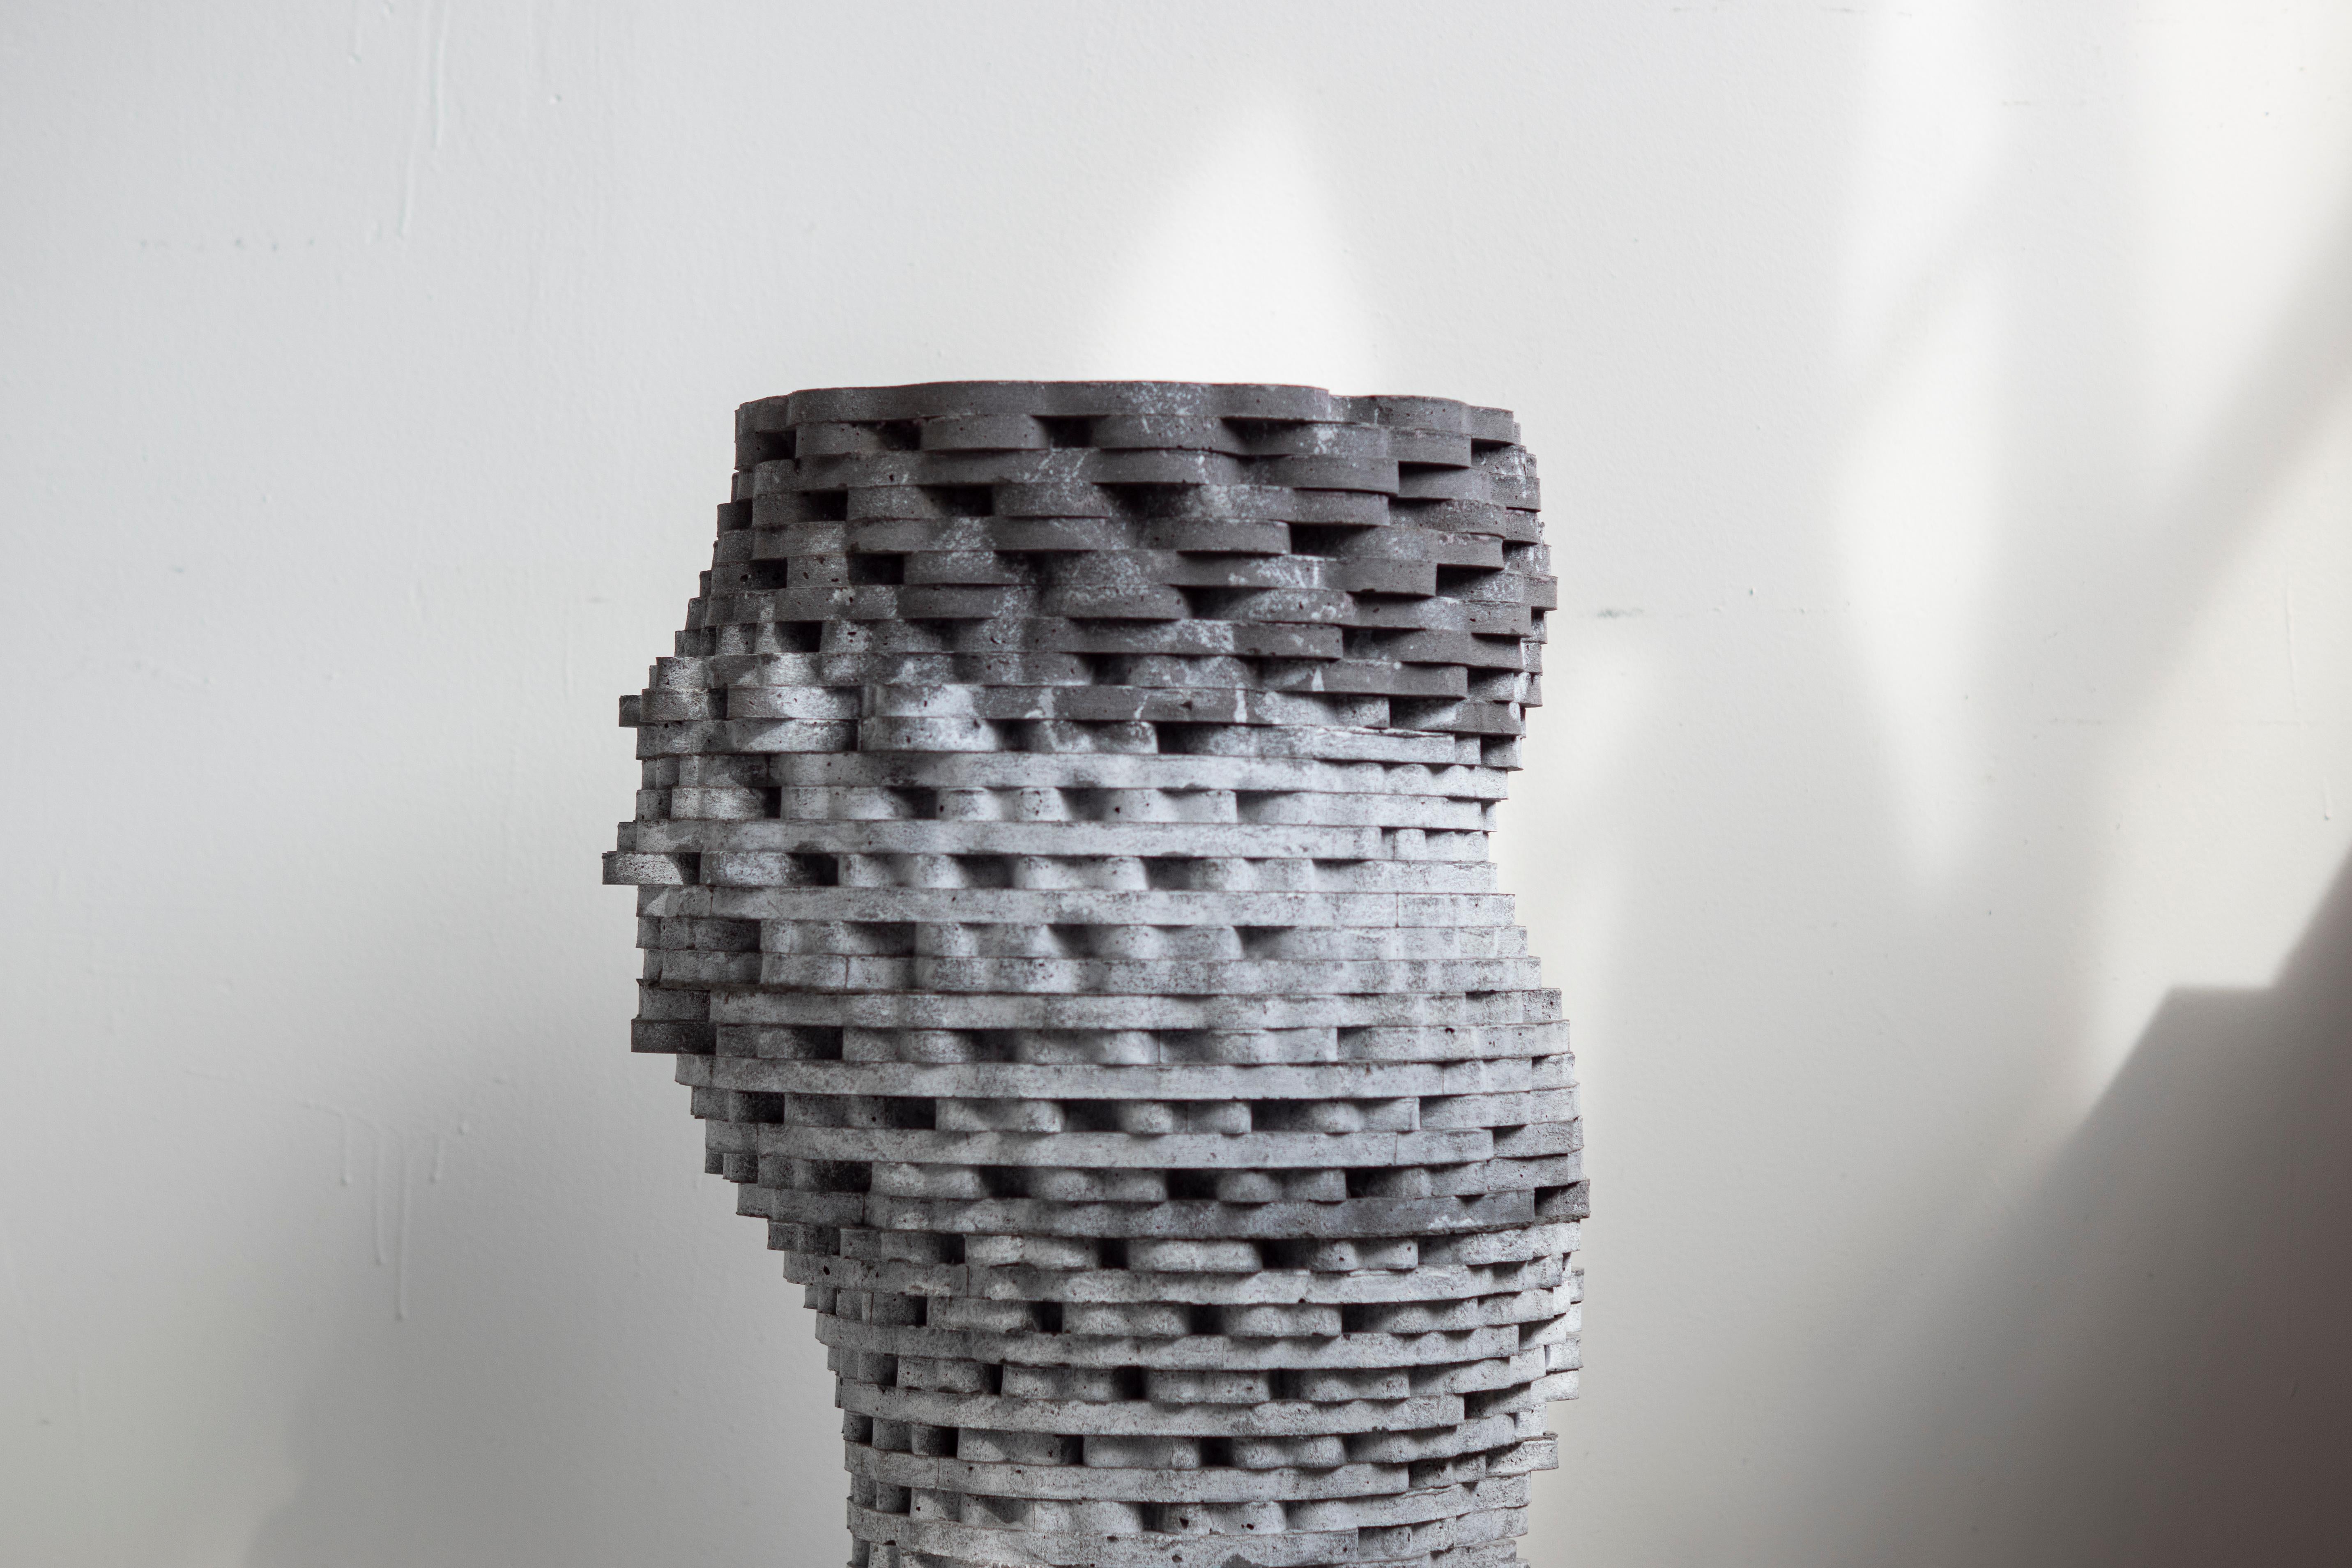 Large hand-cast vessel for indoor and outdoor use.

At the intersection of art, craft, and design, Concrete Poetics' debut collection of hand-cast cement sculptural furniture and accessories streamlines visually intriguing and dynamic forms